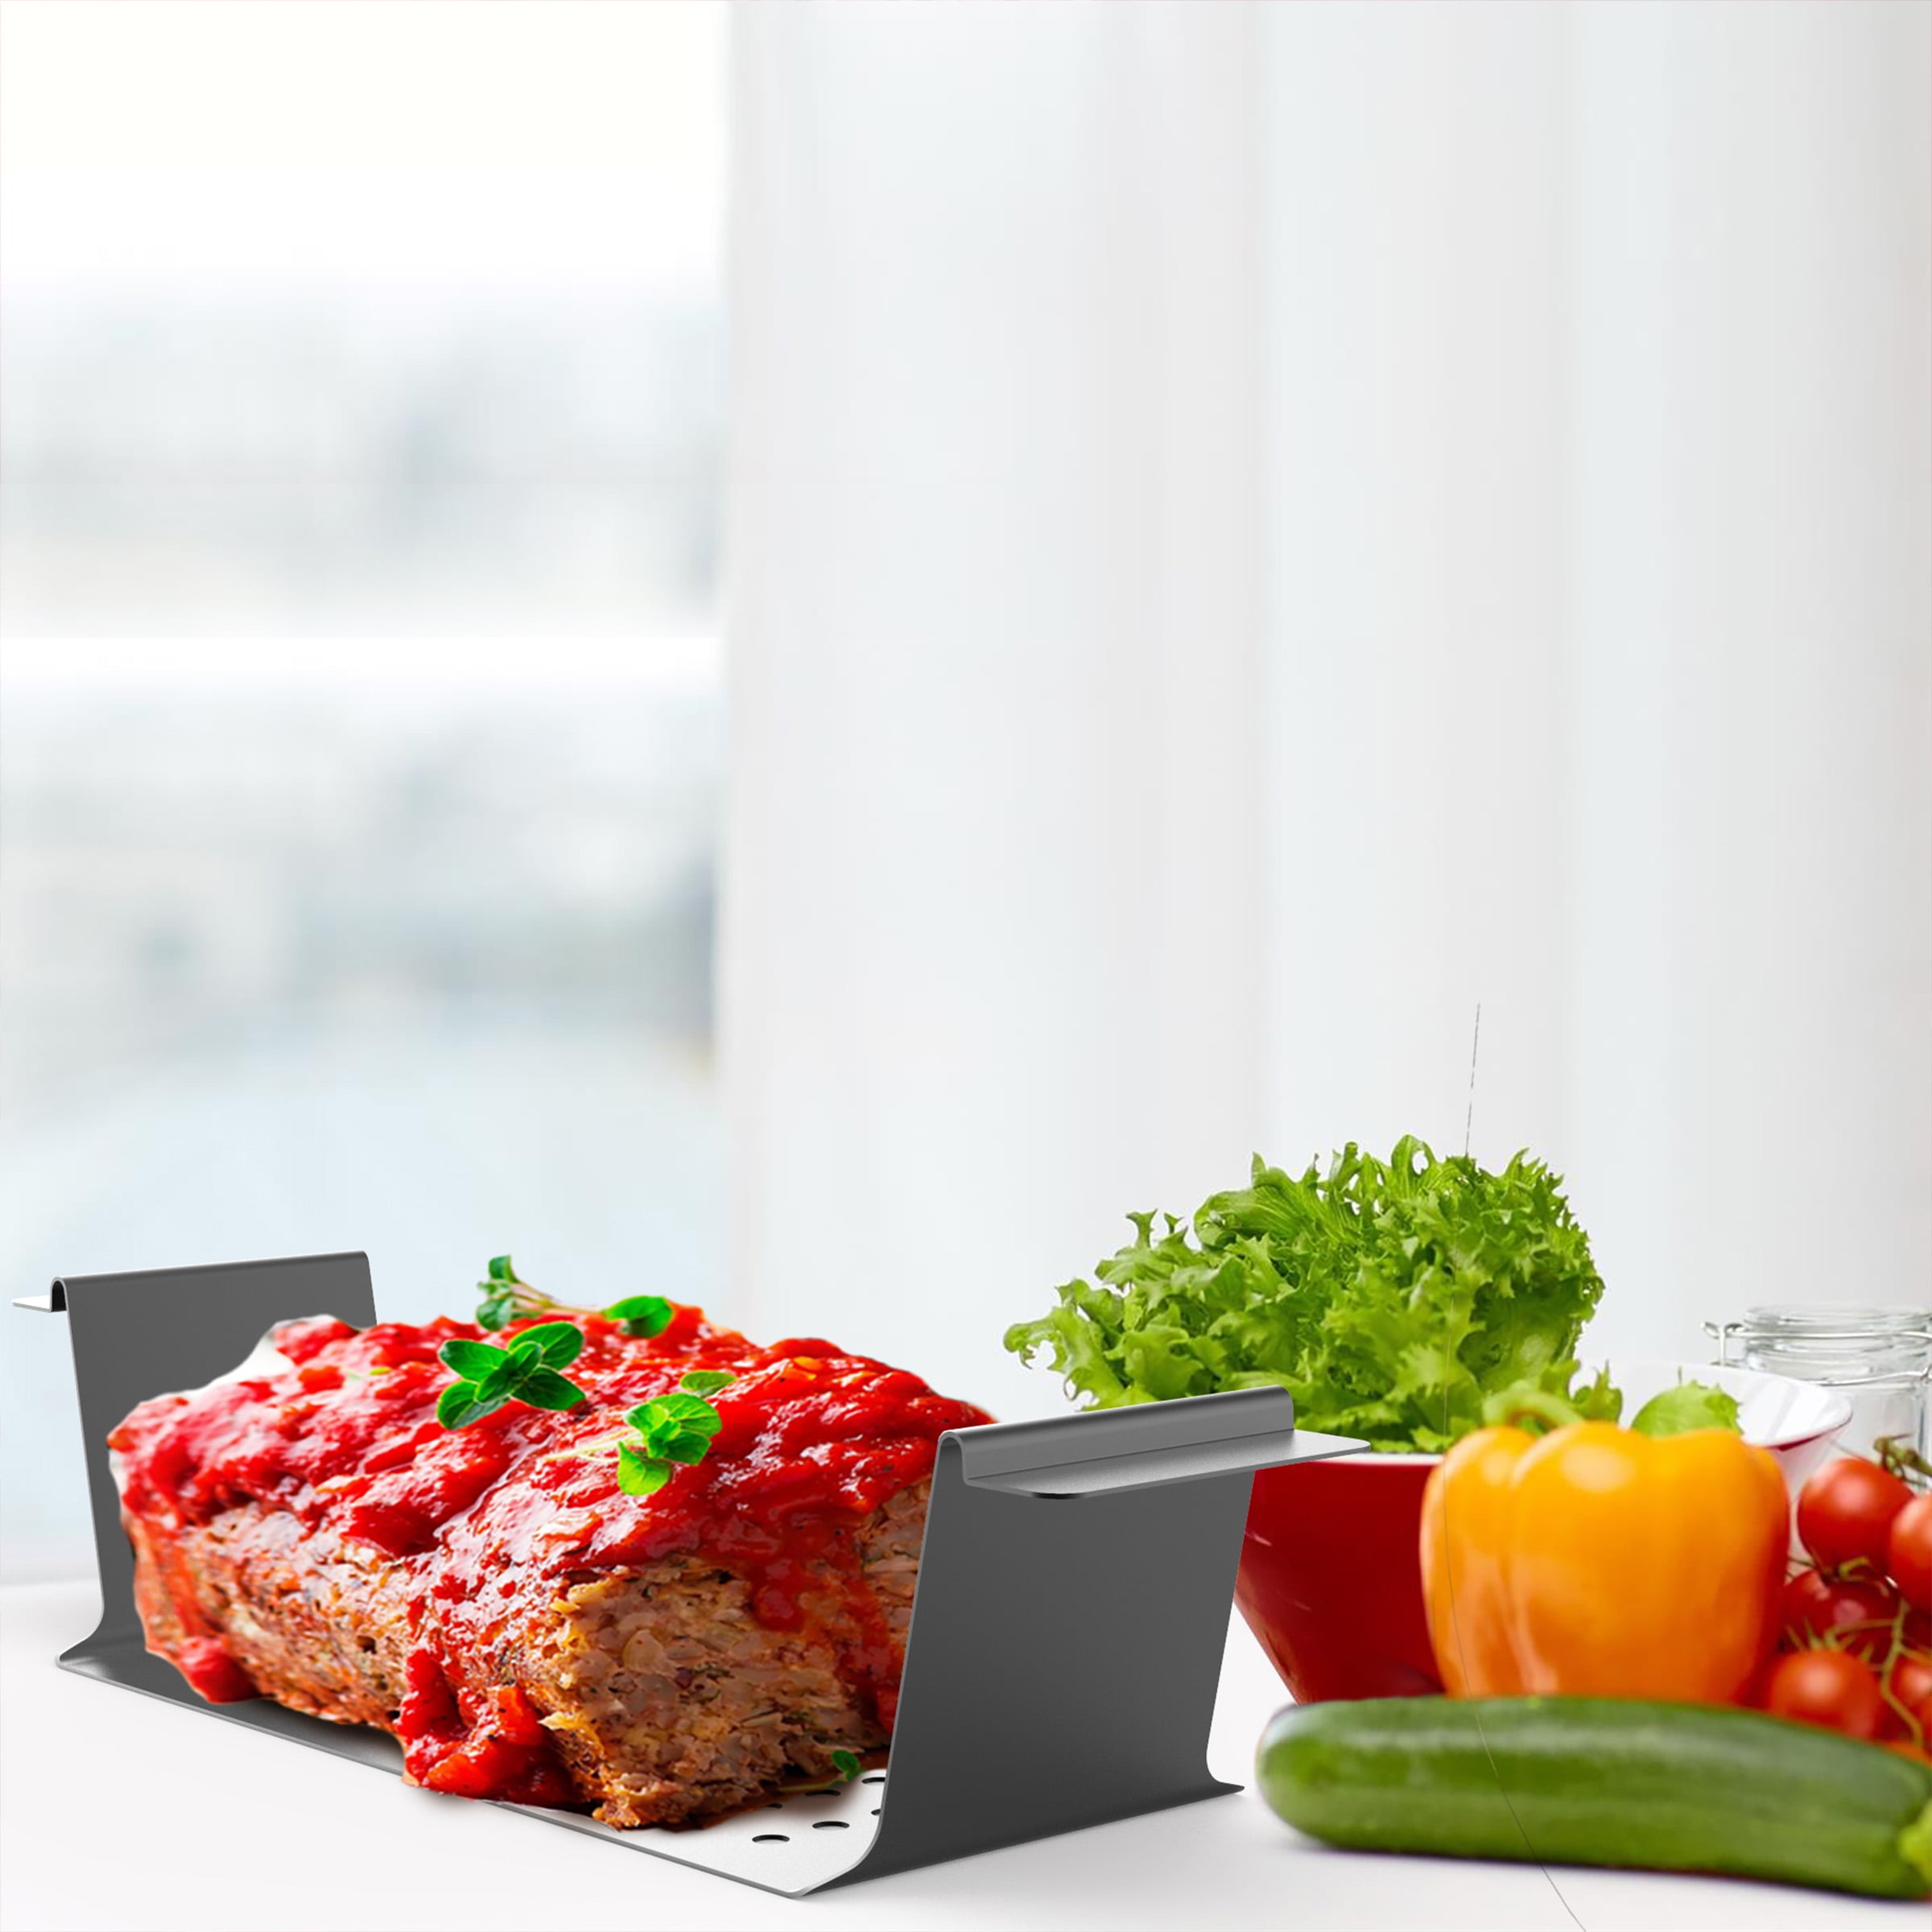  HONGBAKE Meatloaf Pan with Drain Tray, 9 x 5 Loaf Pans with  Insert, Nonstick Meat Loaf for Baking, Reduce the Fat and Kick Up the  Flavor, Champagne Gold: Home & Kitchen